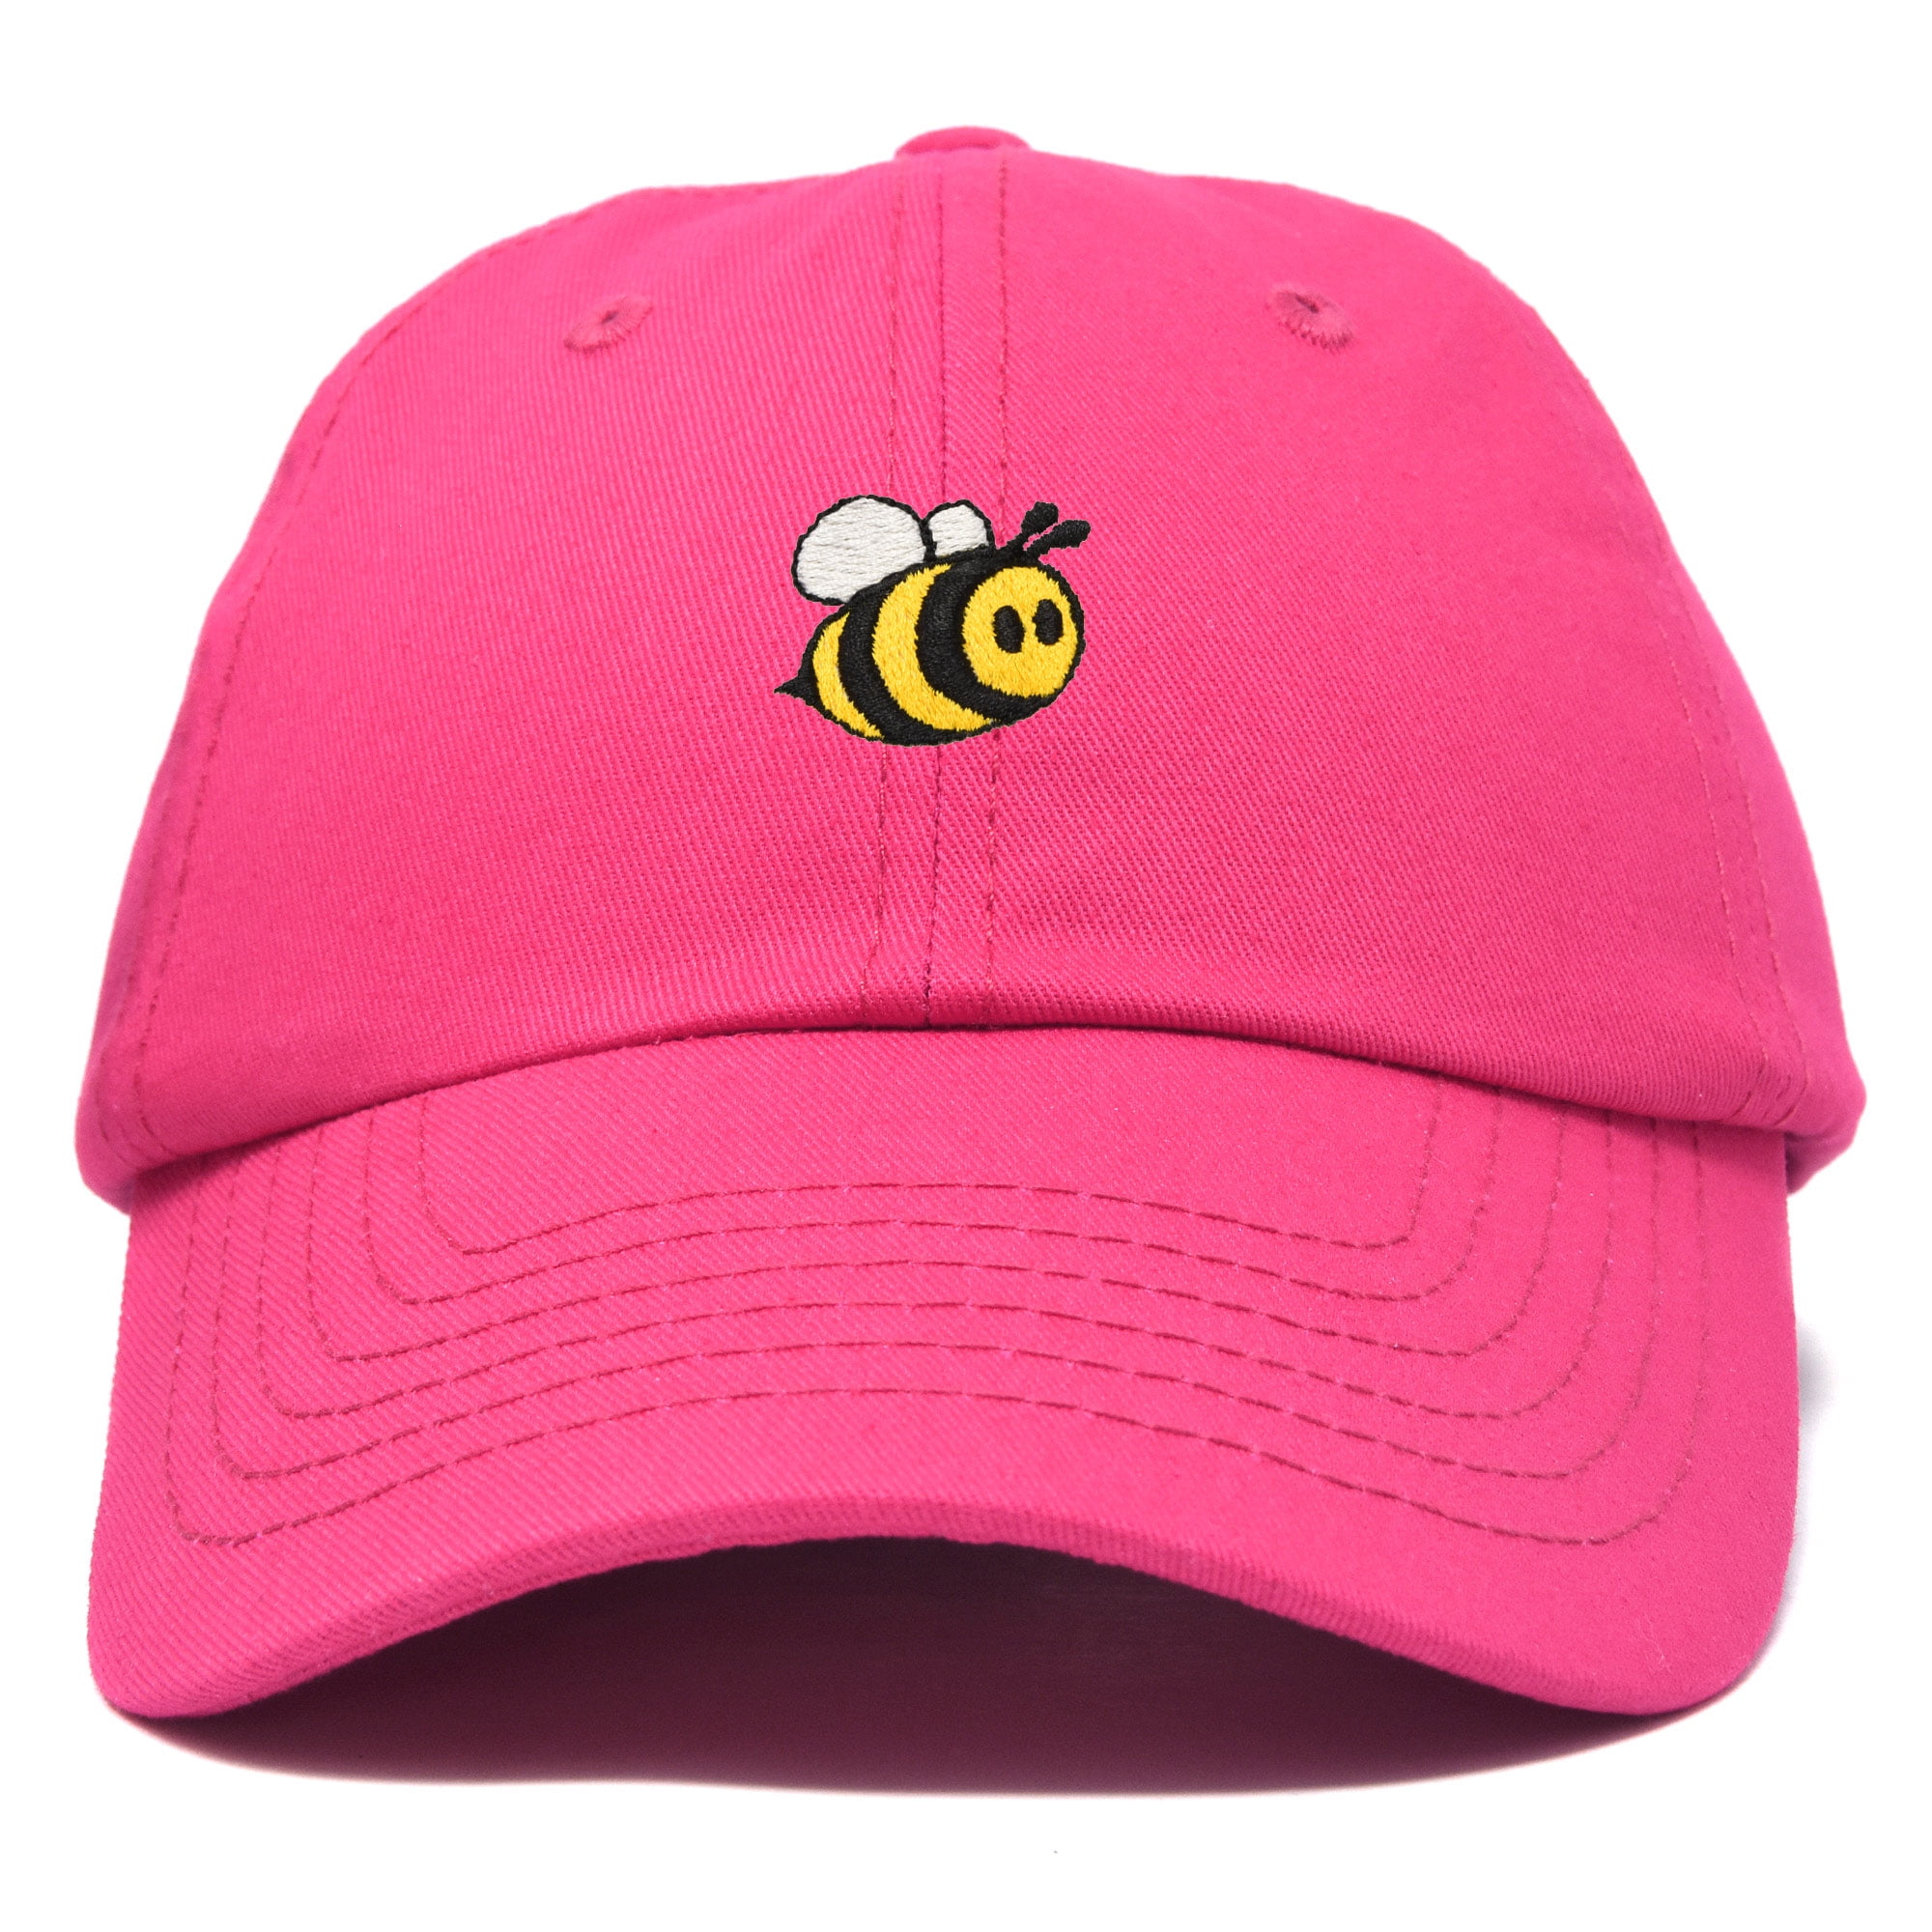 DALIX Bumble Bee Baseball Cap Dad Hat Embroidered Womens Girls in Hot ...